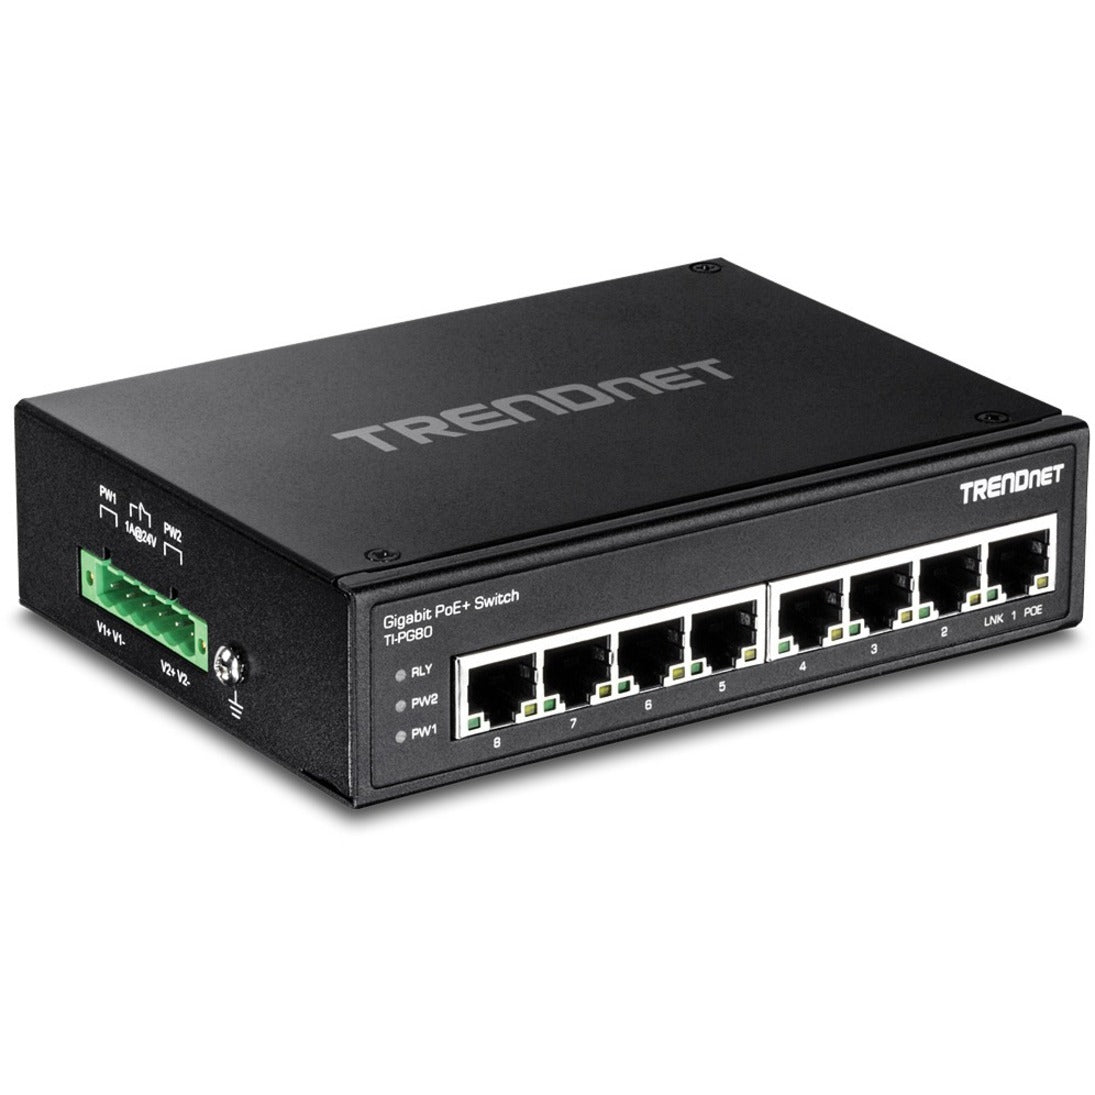 TRENDnet 8-Port Hardened Industrial Unmanaged Gigabit PoE+ DIN-Rail Switch, 200W Full PoE+ Power Budget, 16 Gbps Switching Capacity, IP30 Rated Network Switch, Lifetime Protection, Black, TI-PG80